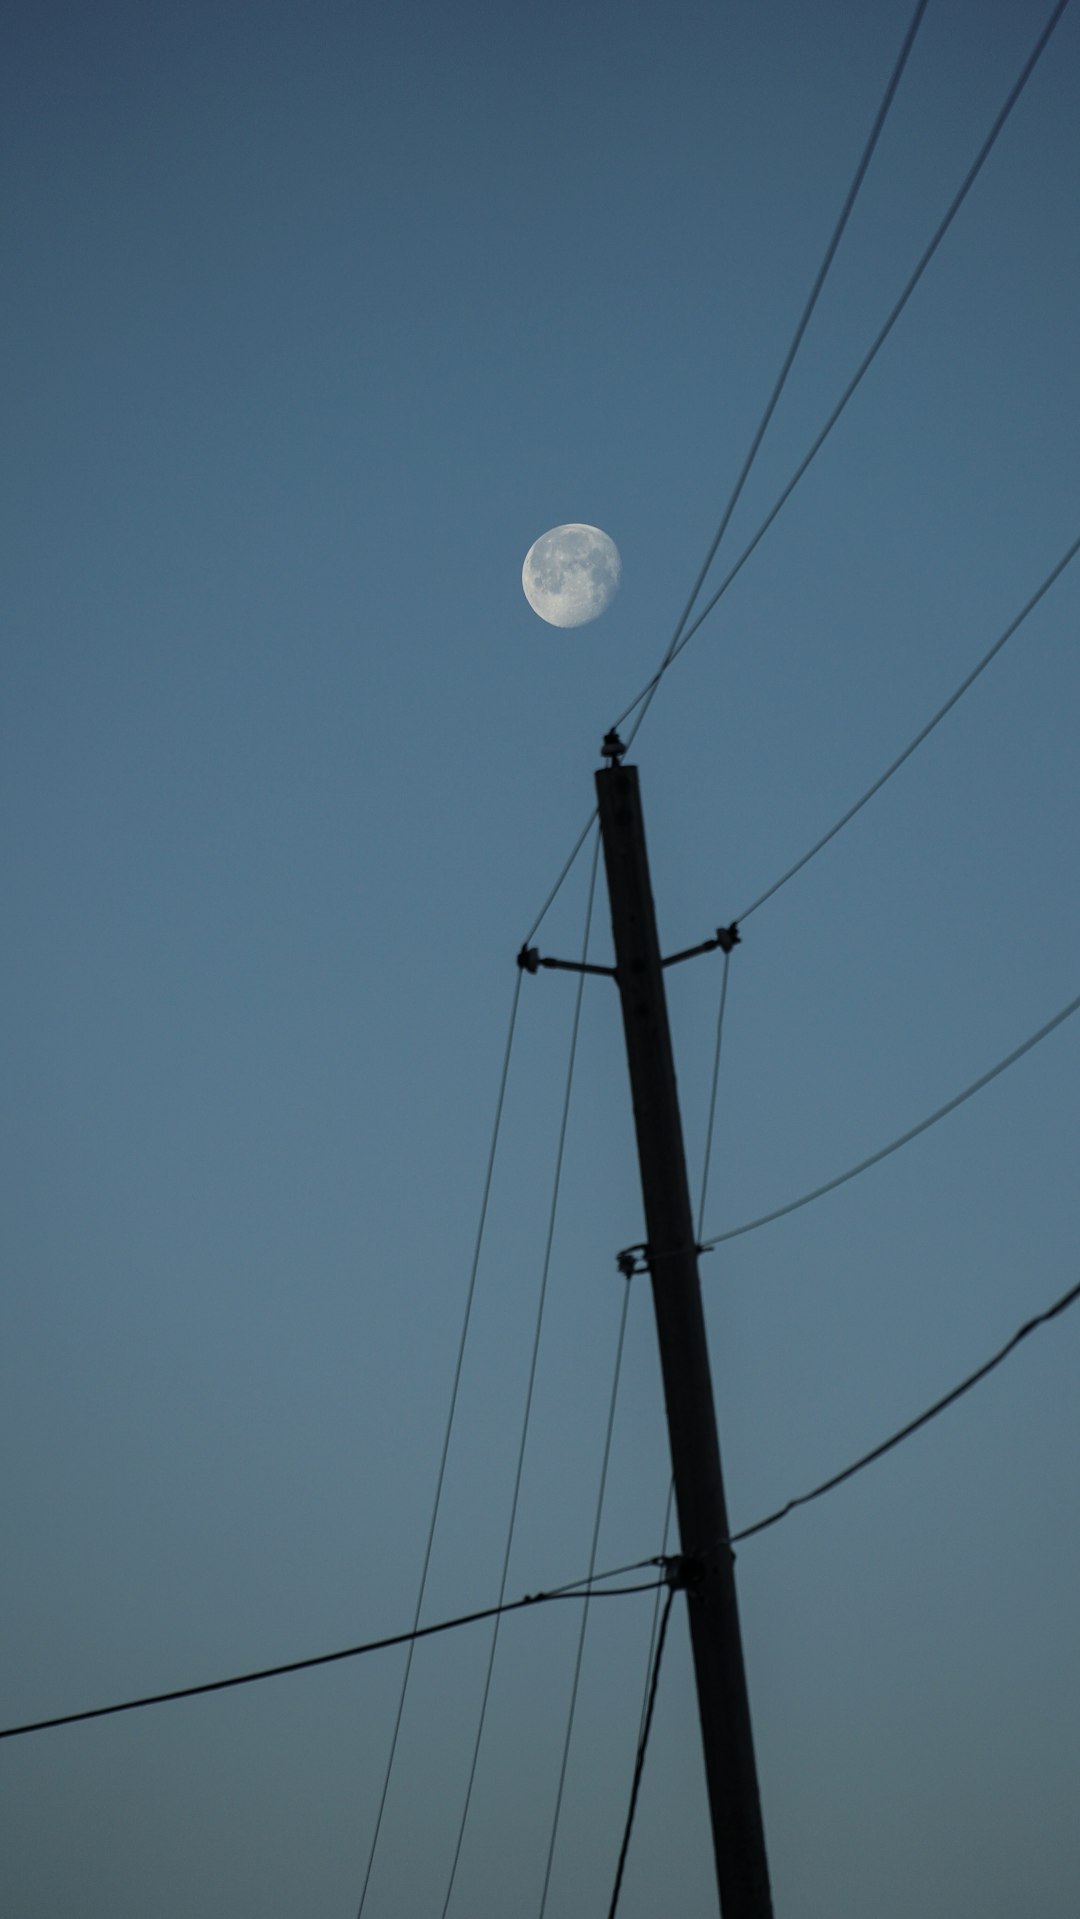 electric post under a full moon in a calm blue sky